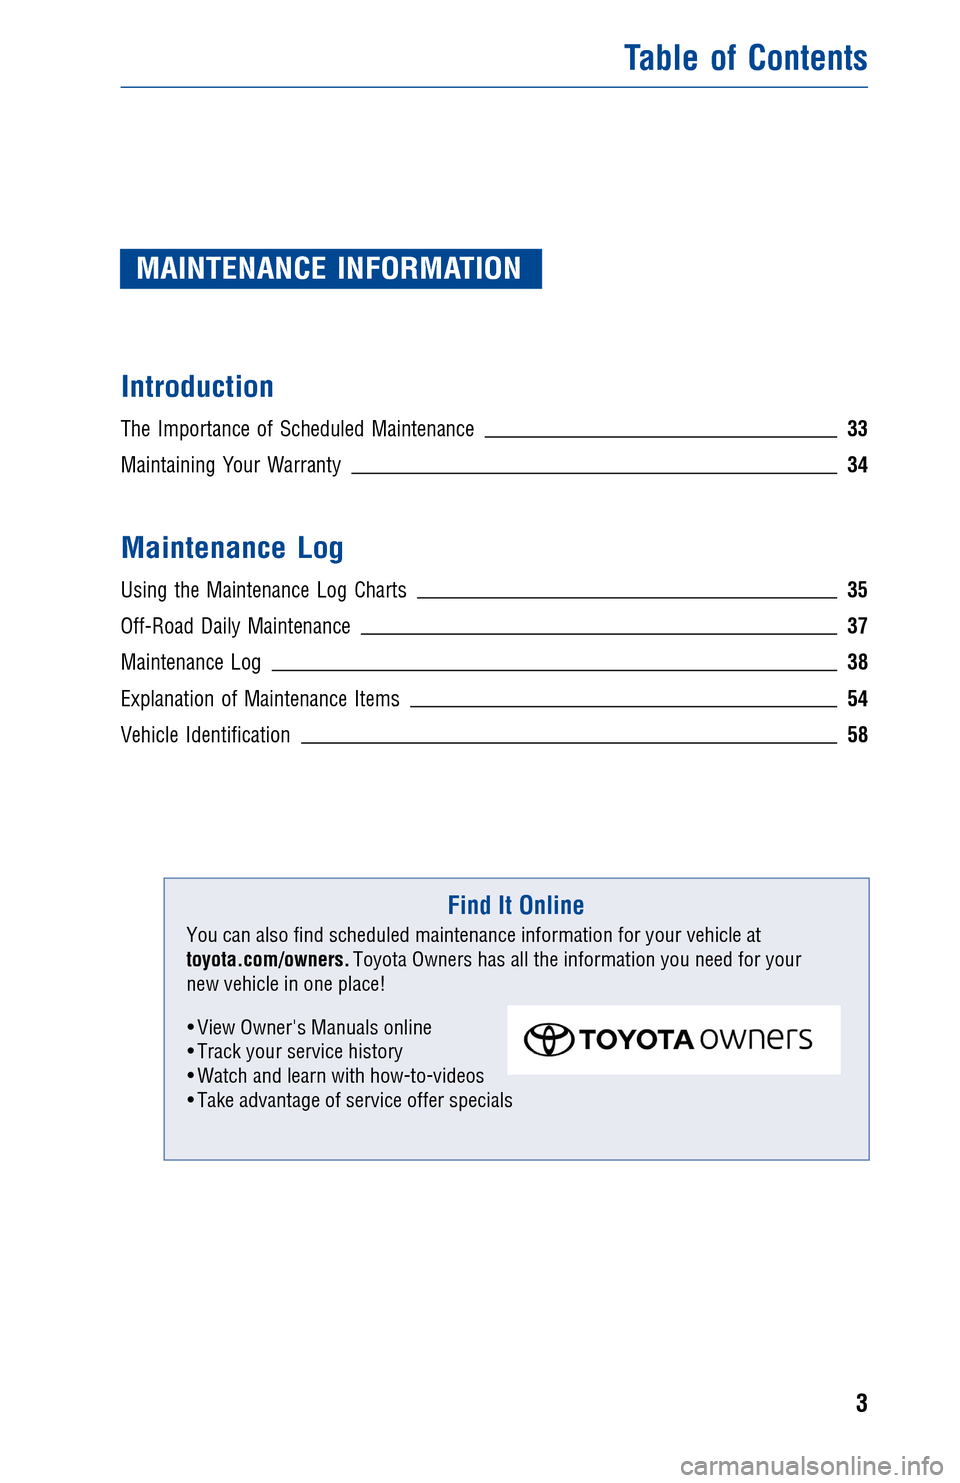 TOYOTA LAND CRUISER 2014 J200 Warranty And Maintenance Guide JOBNAME: 1491133-2014-lndWG-E PAGE: 3 SESS: 11 OUTPUT: Fri Jul 12 10:06:01 2013 
/tweddle/toyota/sched-maint/1491133-en-lnd/wg
MAINTENANCE INFORMATION
Introduction
The Importance of Scheduled Maintena